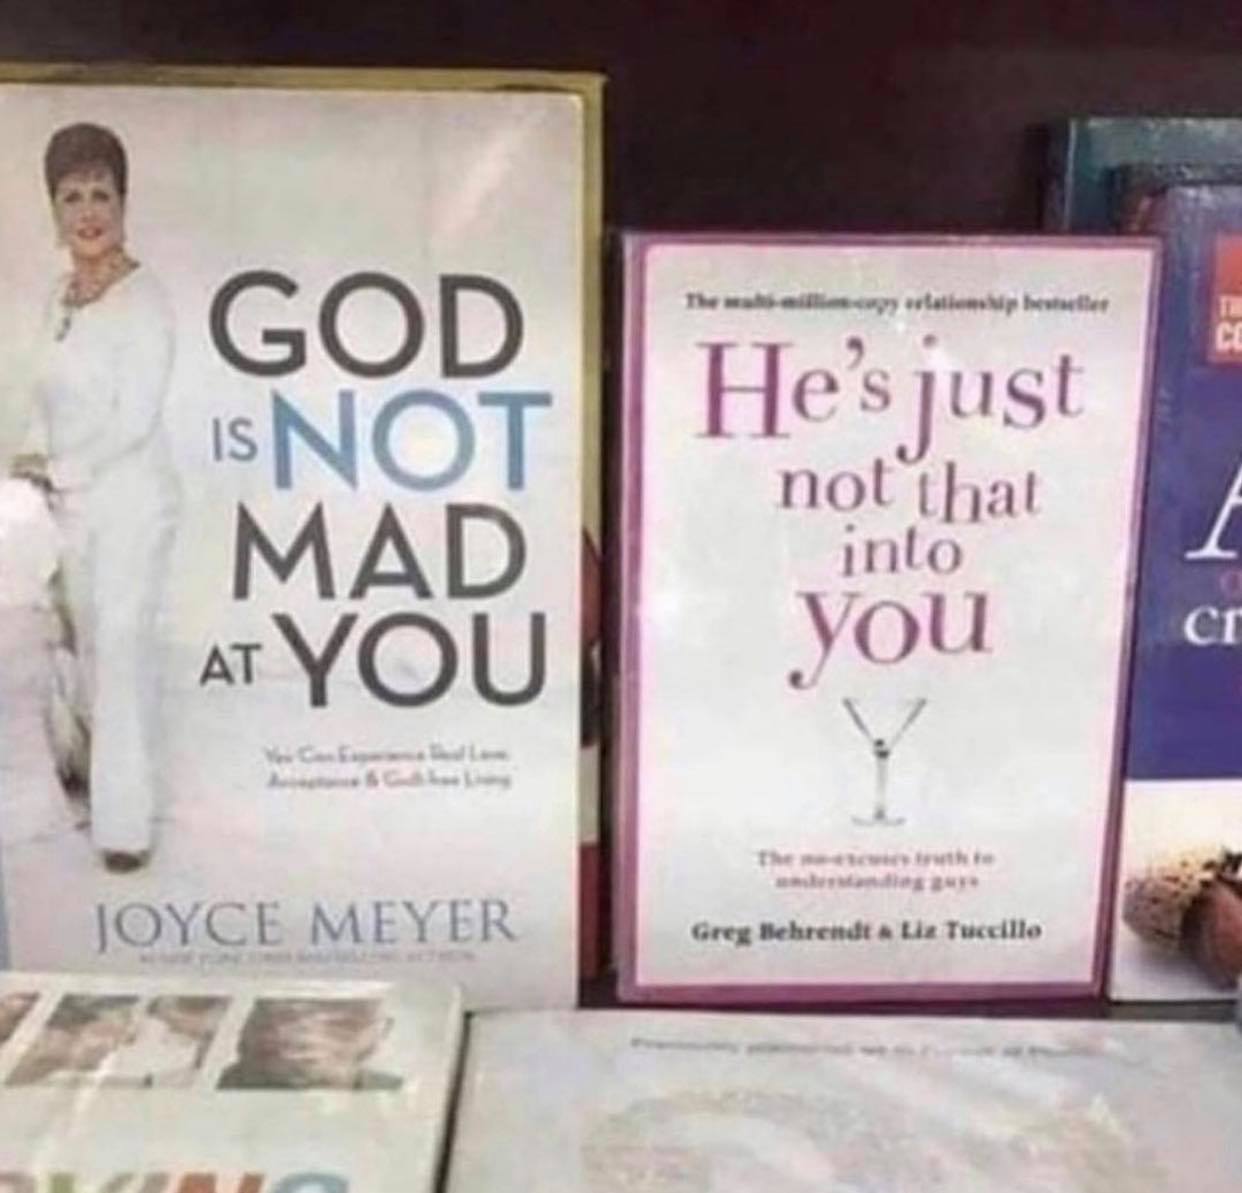 religion memes - novel - The was alaptatem.ibelle Ce He's just God Is Not Mad At You not that into You Cr Joyce Meyer des Greg Behrendta Lia Tuccillo